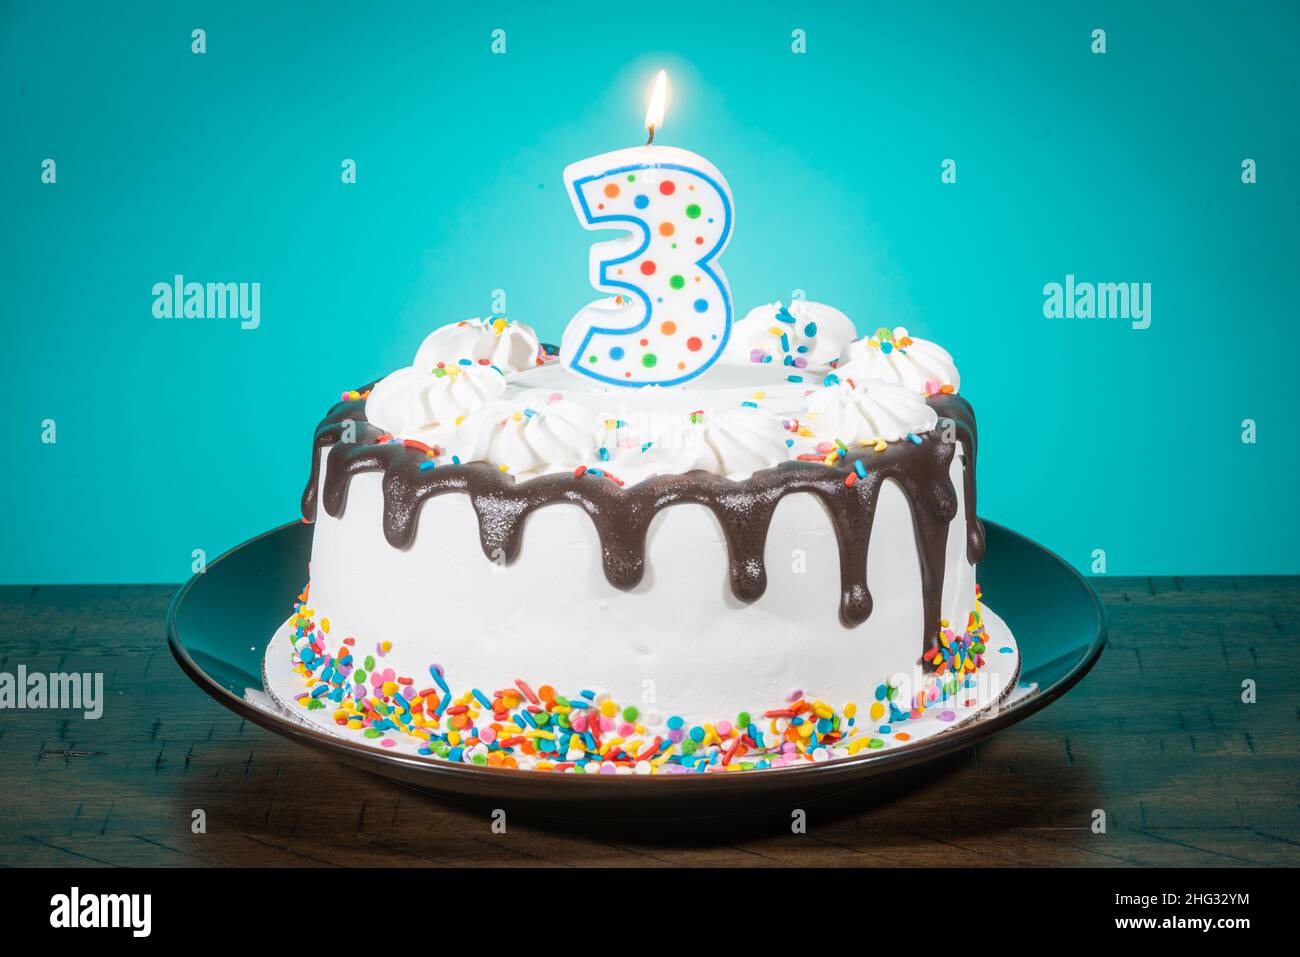 A birthday cake bears a candle in the shape of the number 3. Stock Photo